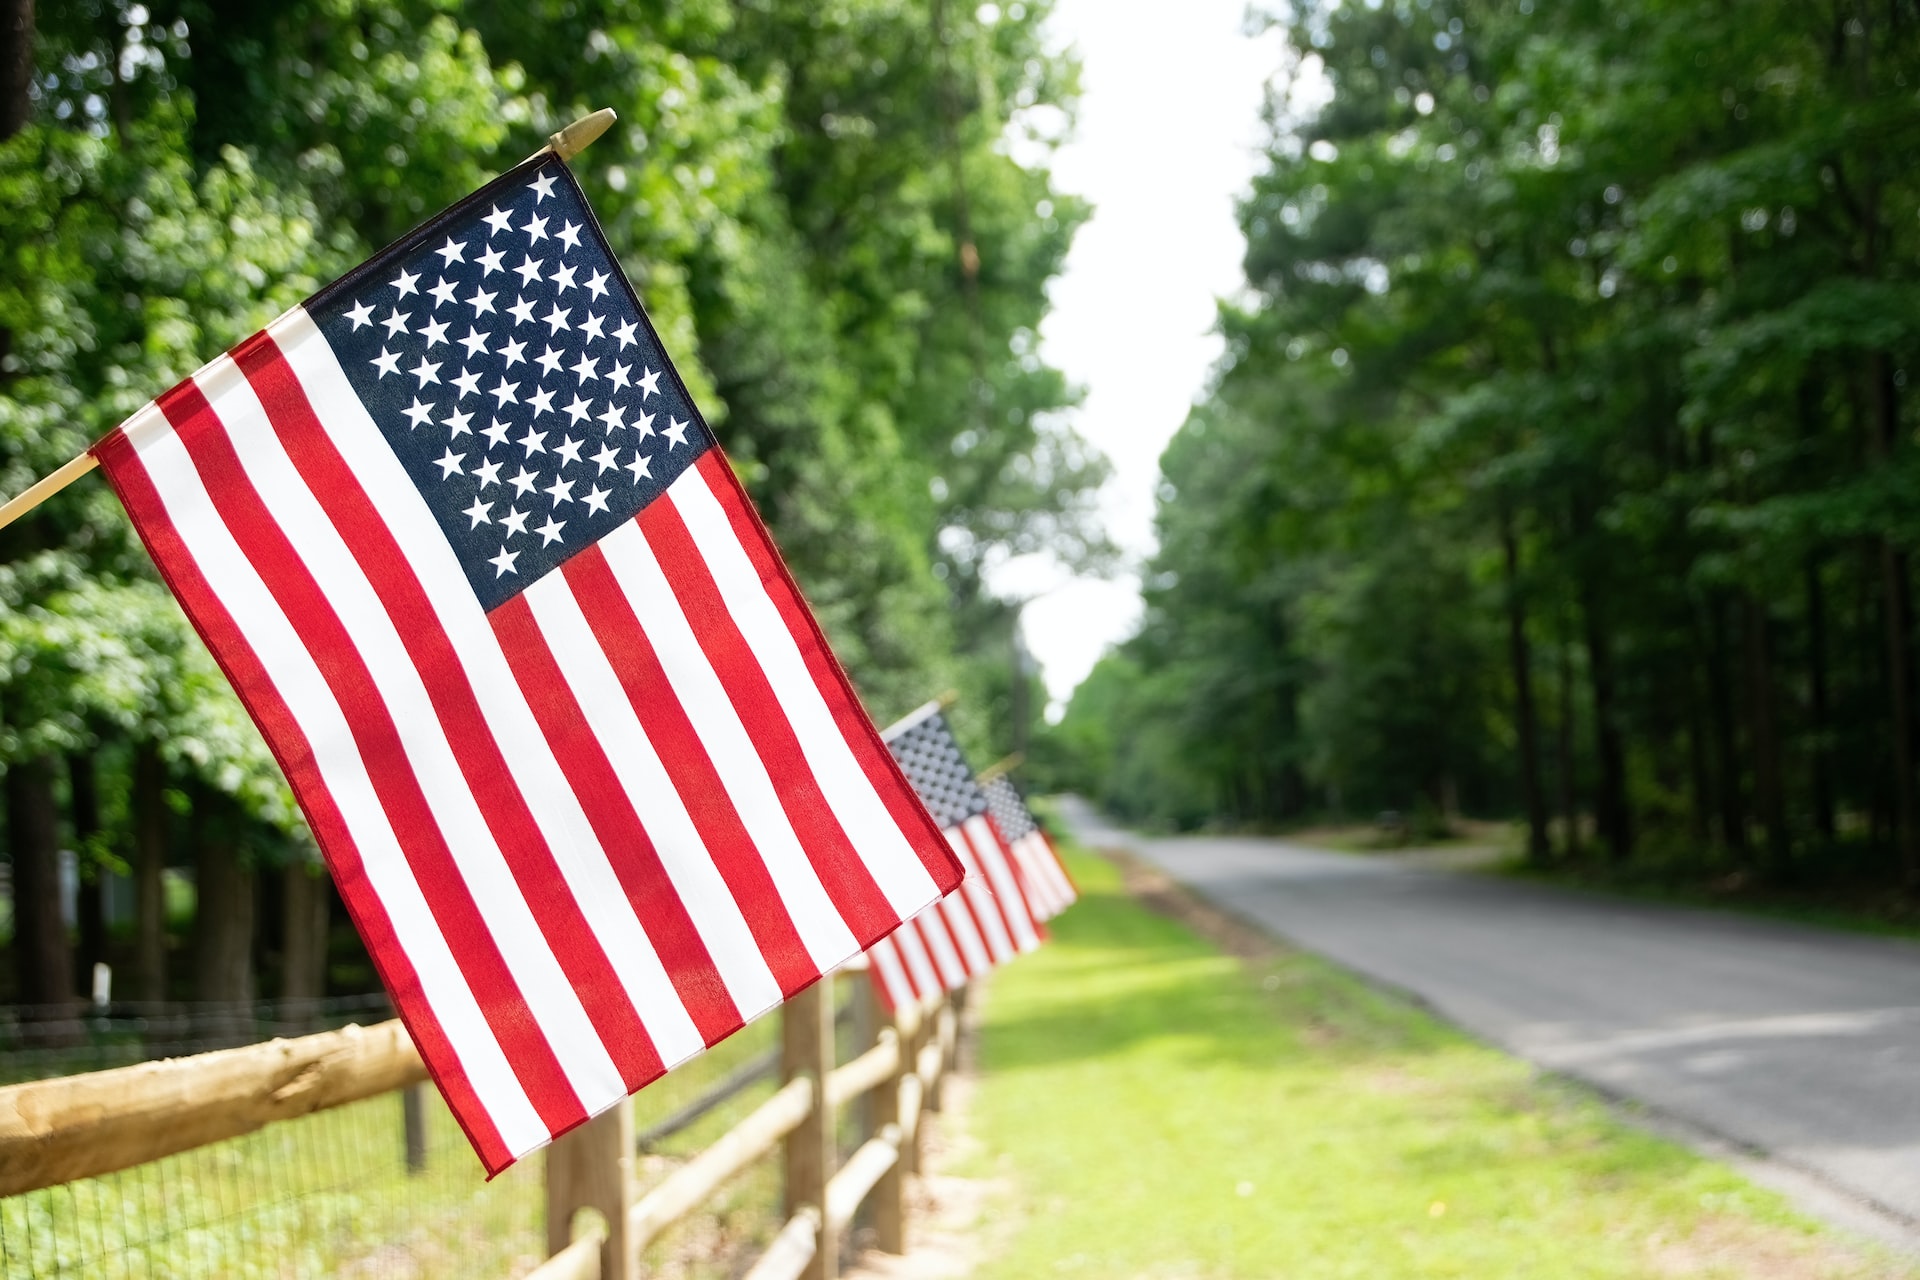 Image of American Flags hanging from a fence